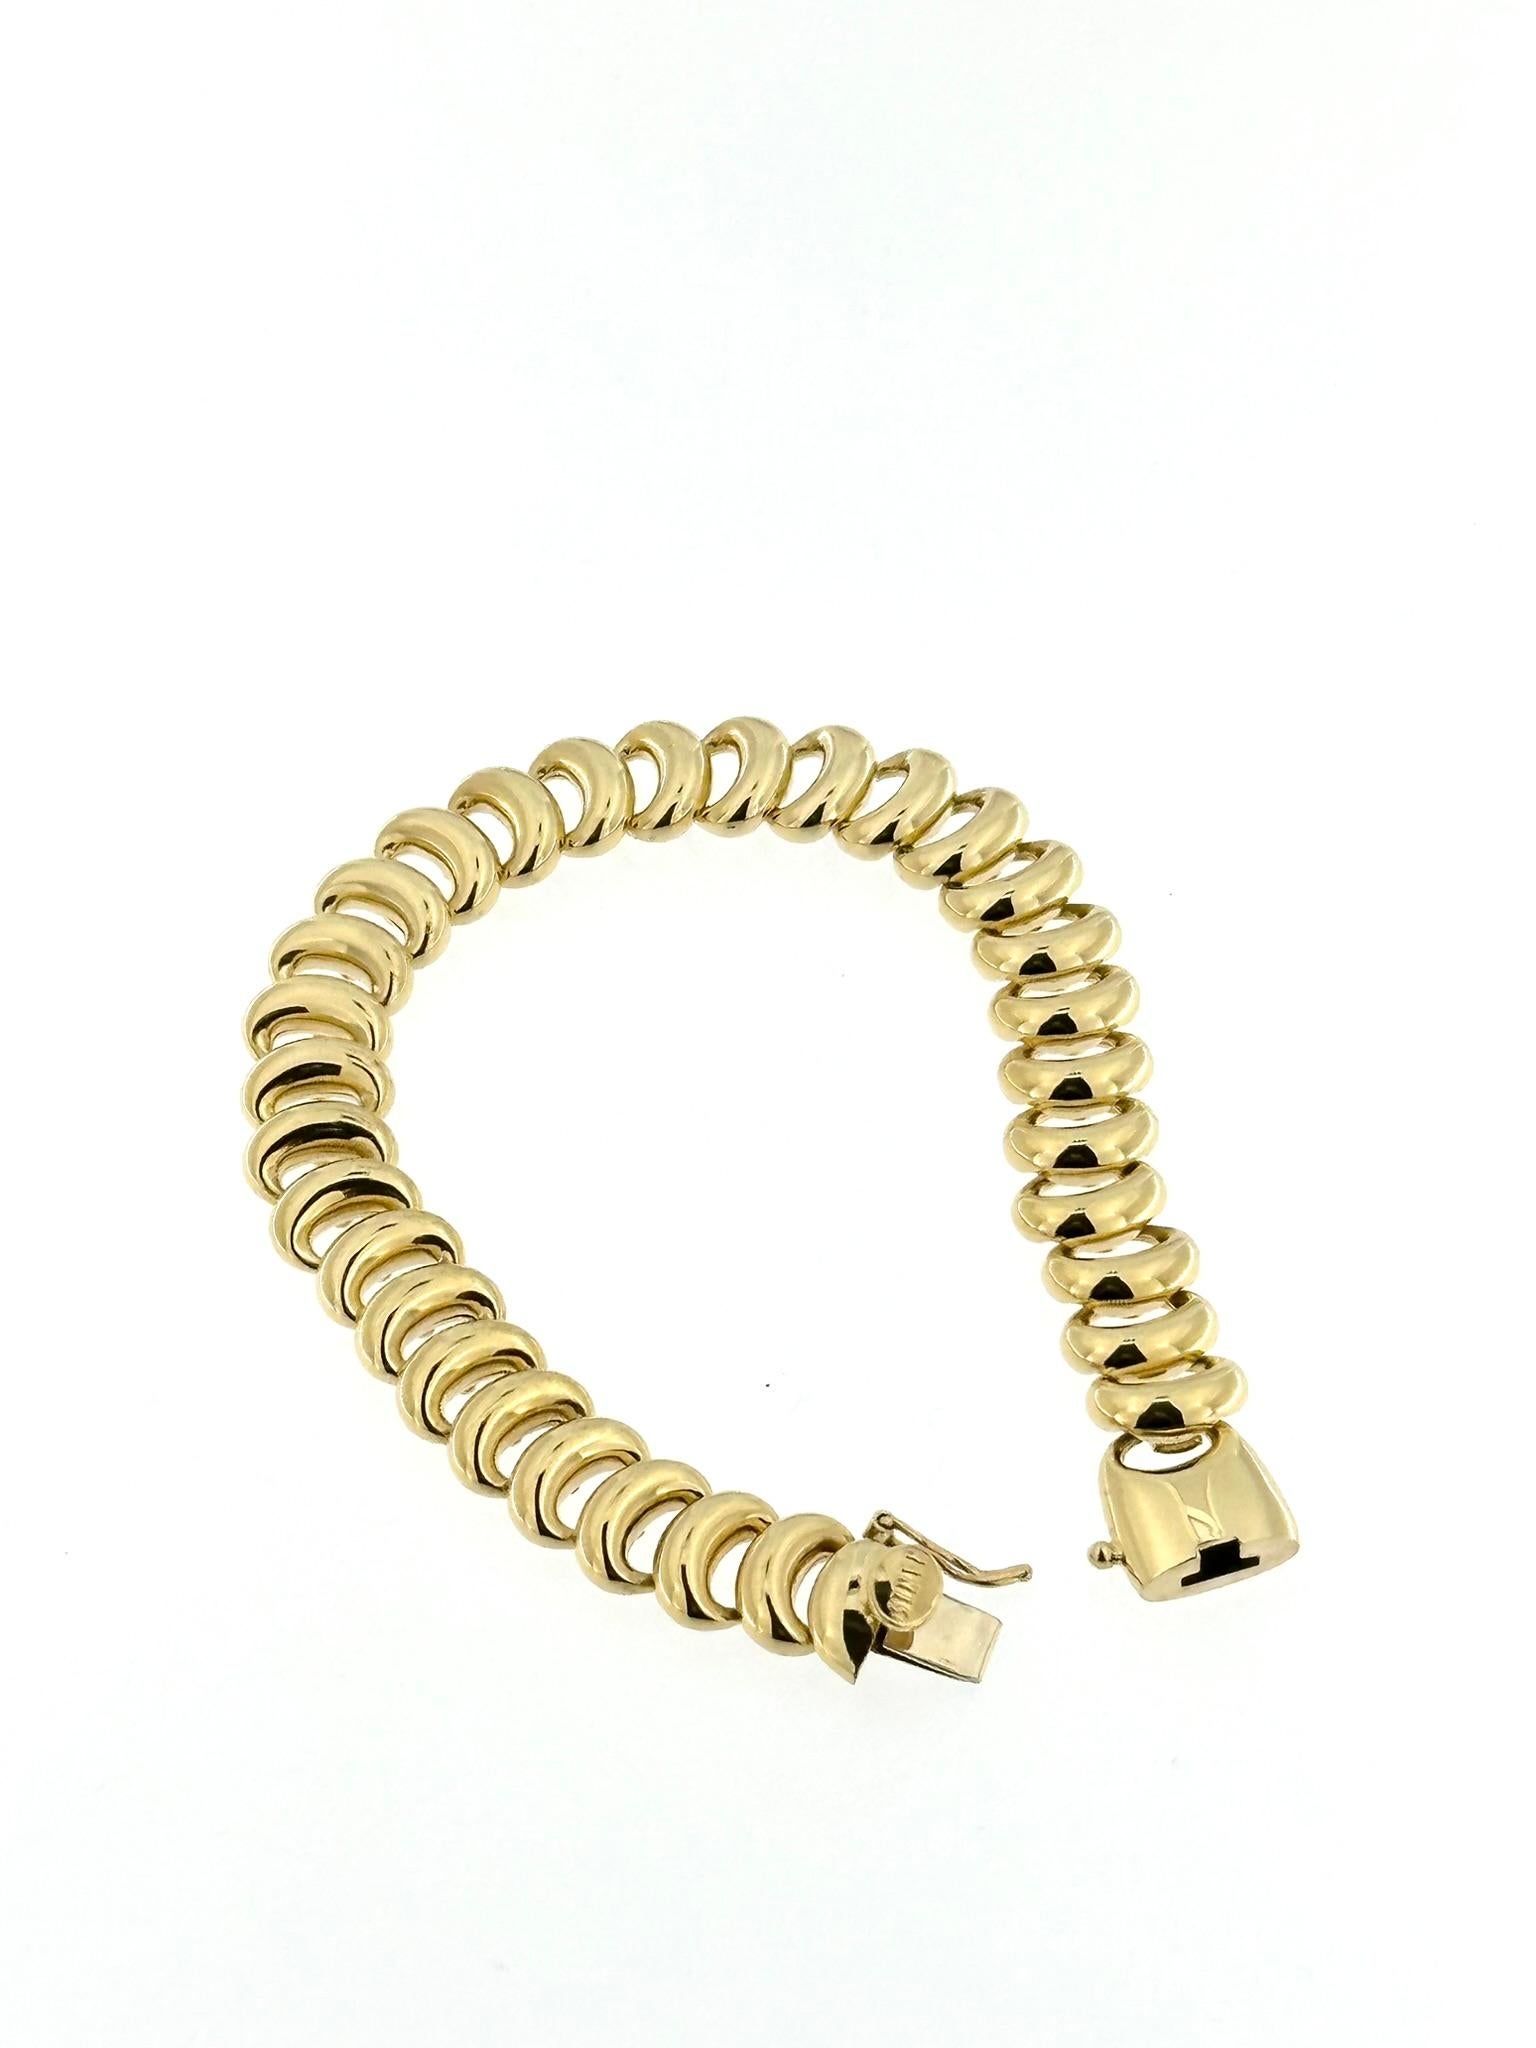 The Nanis Yellow Gold Flexible Bracelet is a luxurious and elegant piece of jewelry crafted by Nanis, an esteemed Italian goldsmith renowned for their exquisite designs and craftsmanship. This bracelet is made from 18-karat yellow gold, signifying a